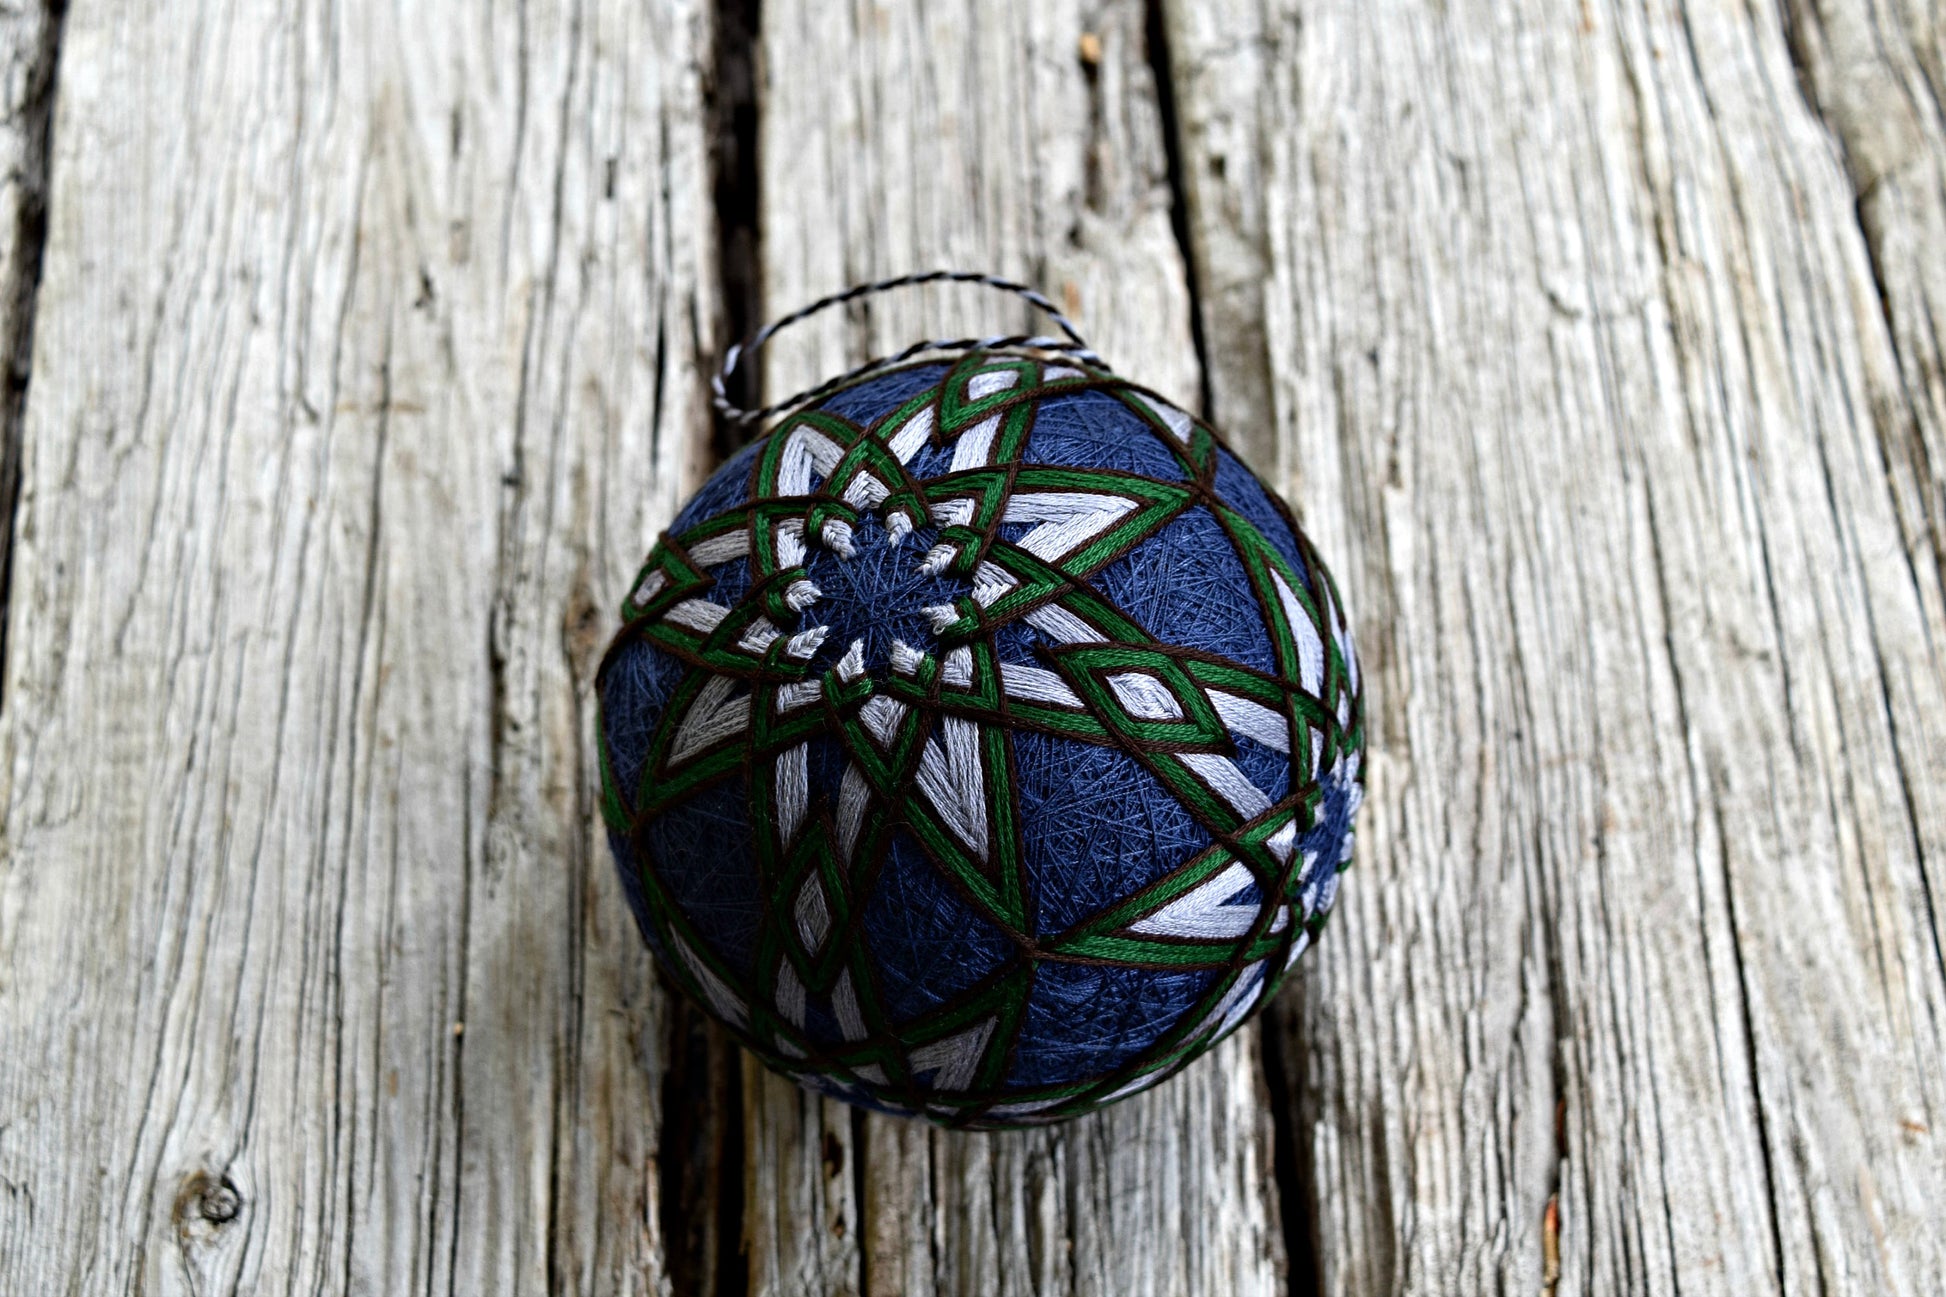 Japanese temari ball ornament embroidered in all over eight pointed stars in green and grey